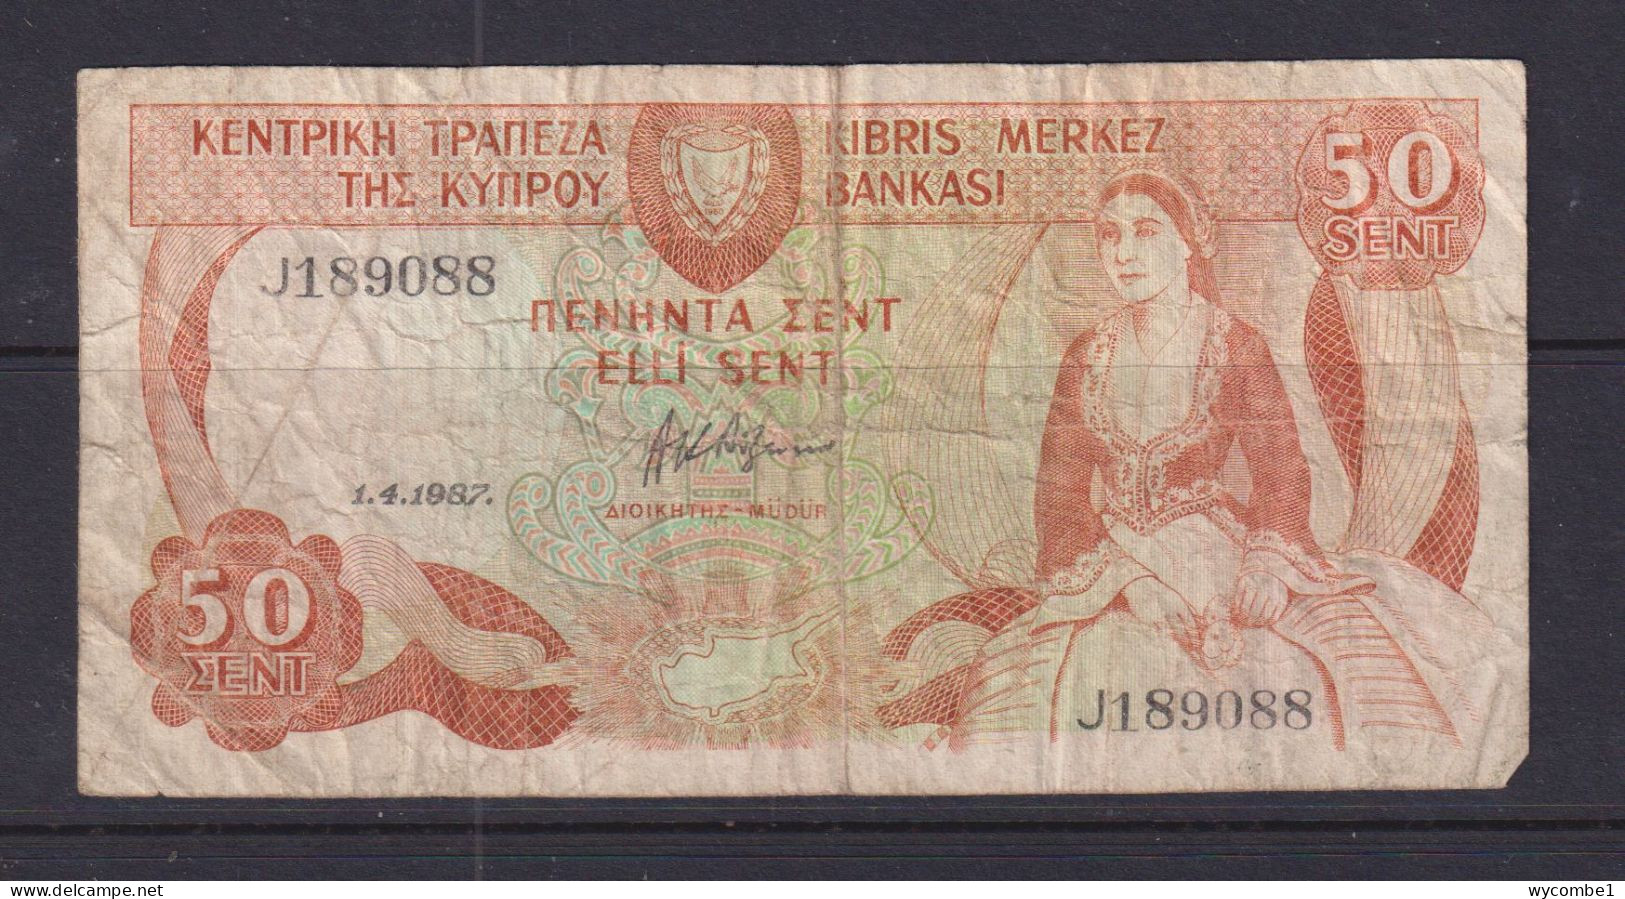 CYPRUS- 1987 50 Sent Circulated Banknote As Scans - Zypern